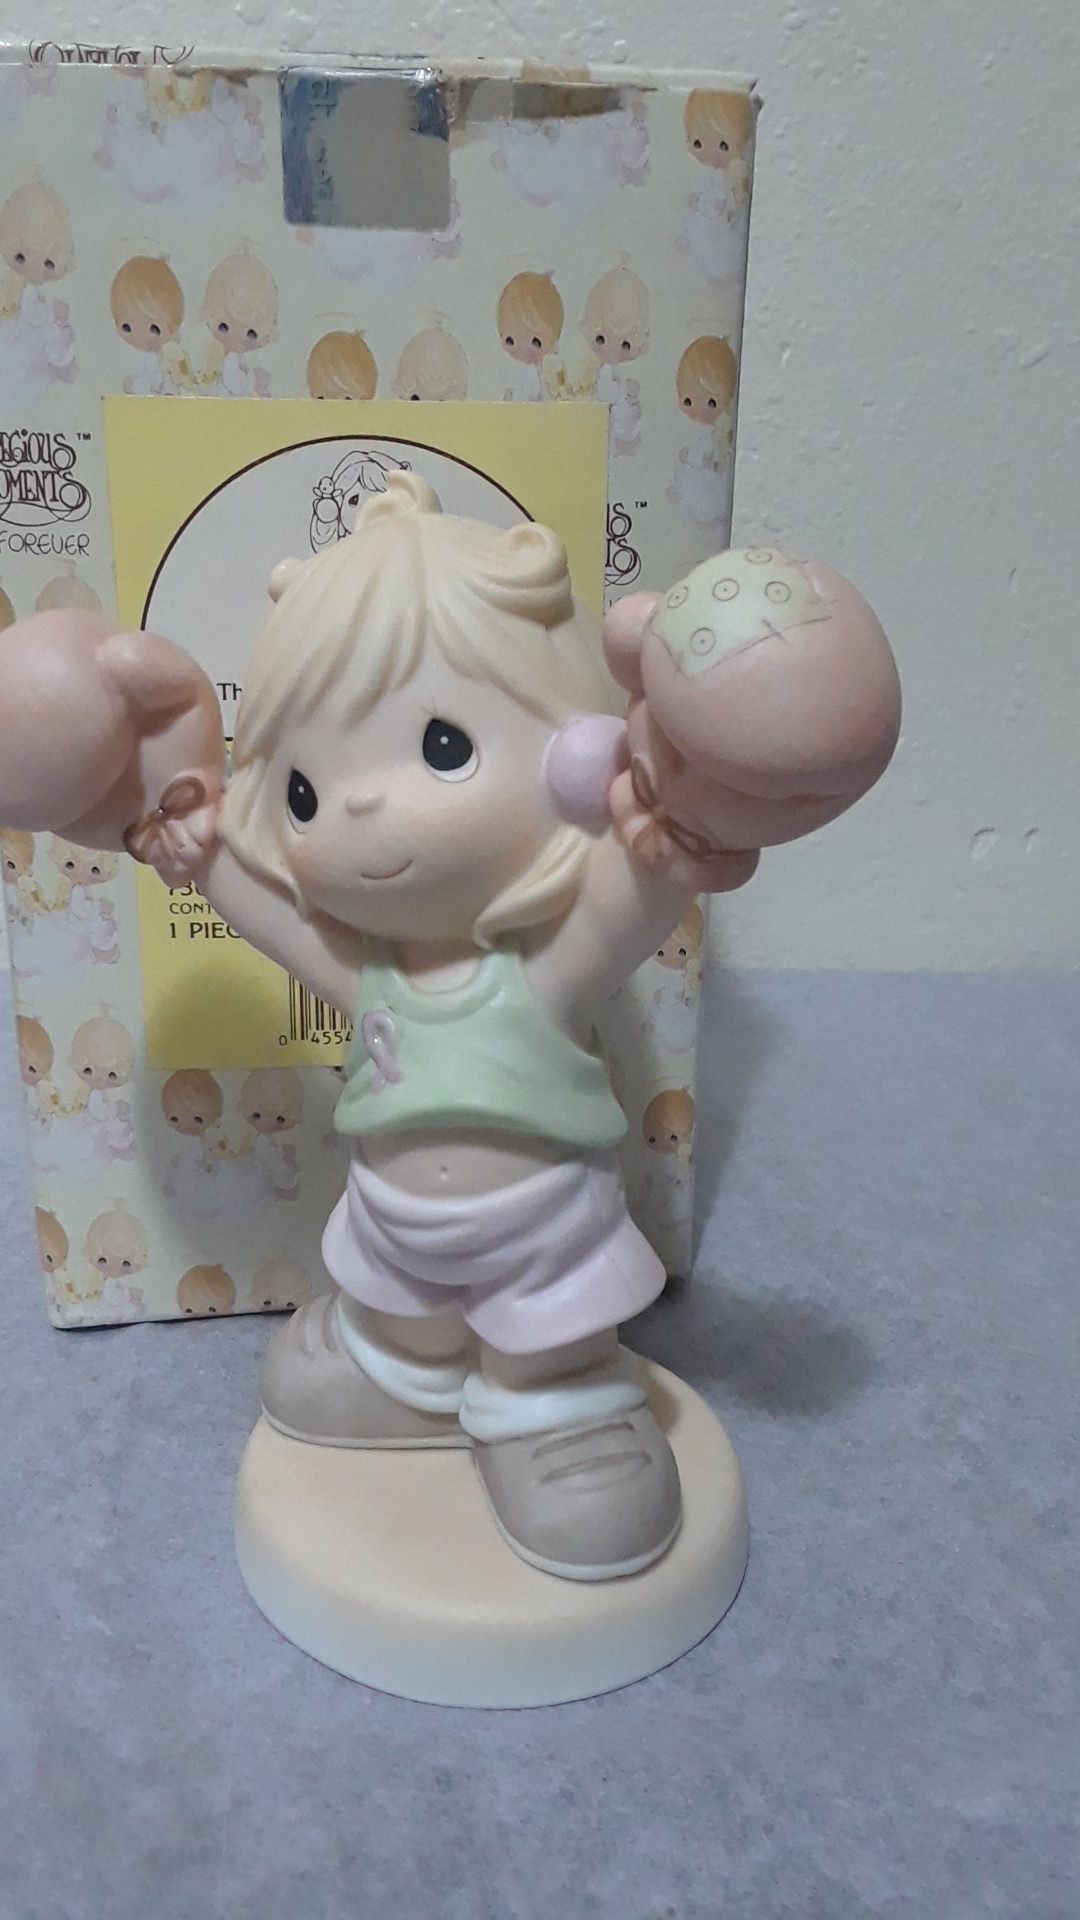 Precious Moments "Life is worth fighting for " figurine